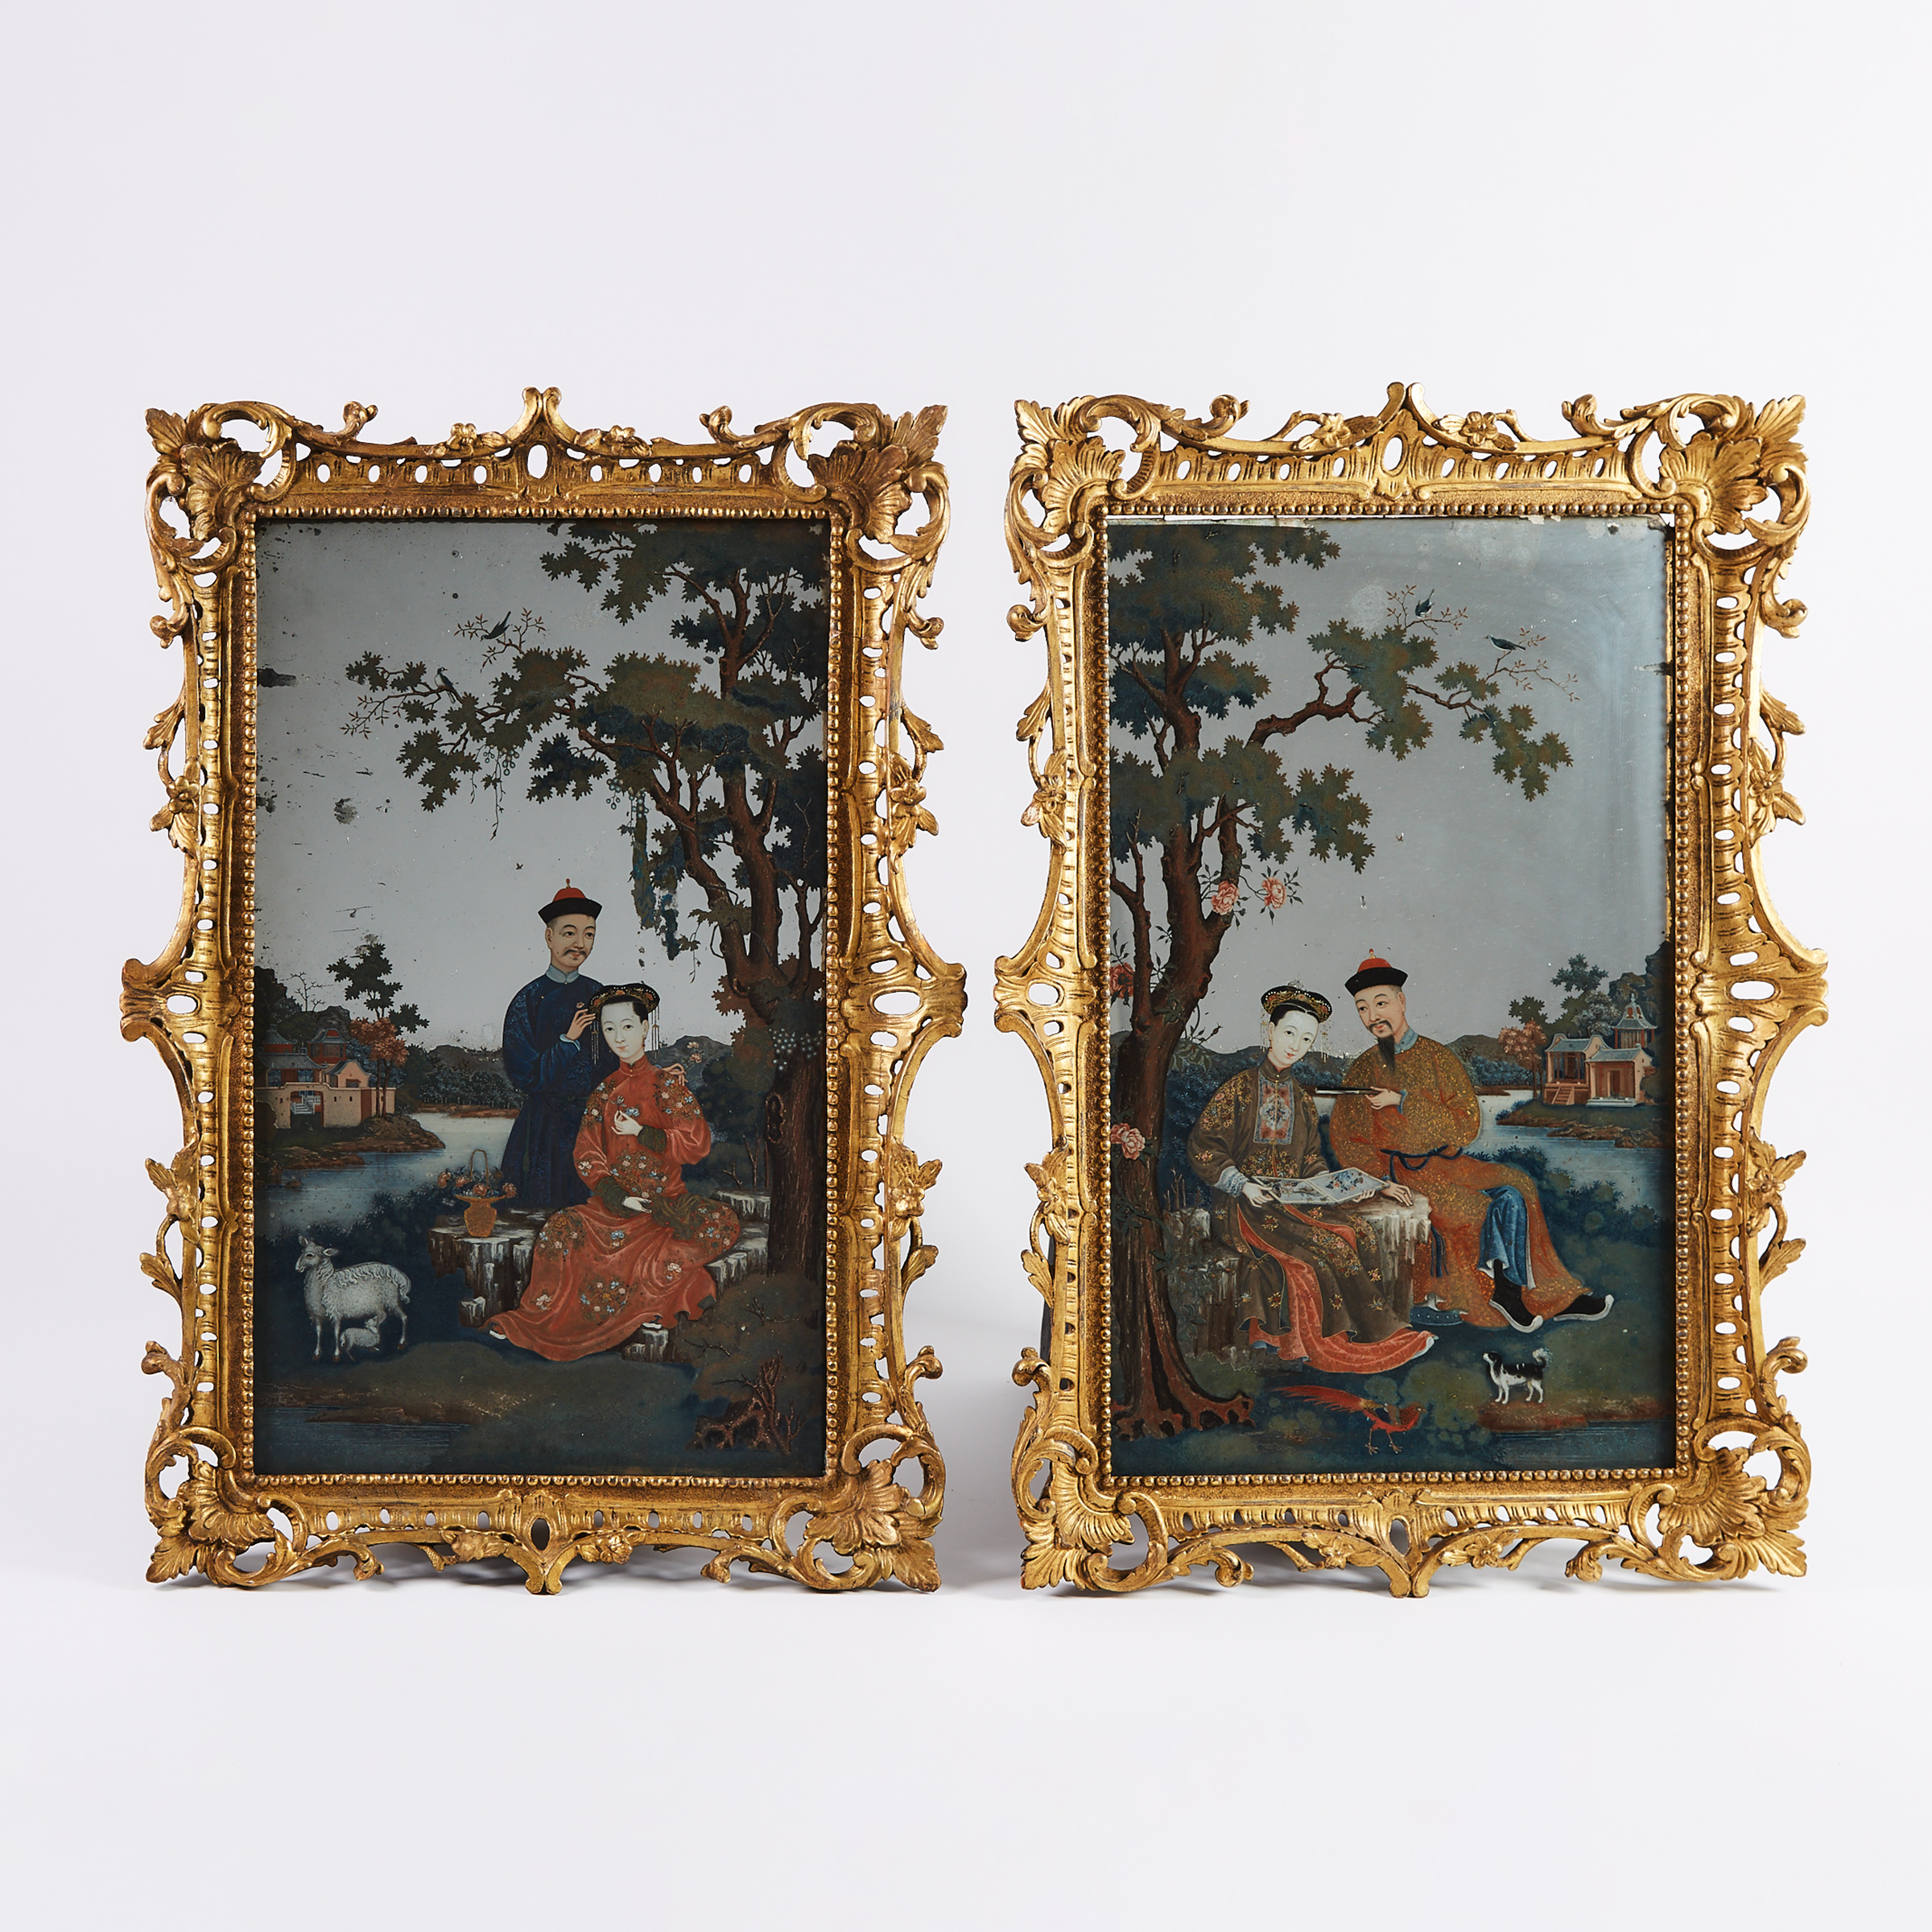 A Pair of Chinese Export Reverse Painted Mirrors, 18th Century